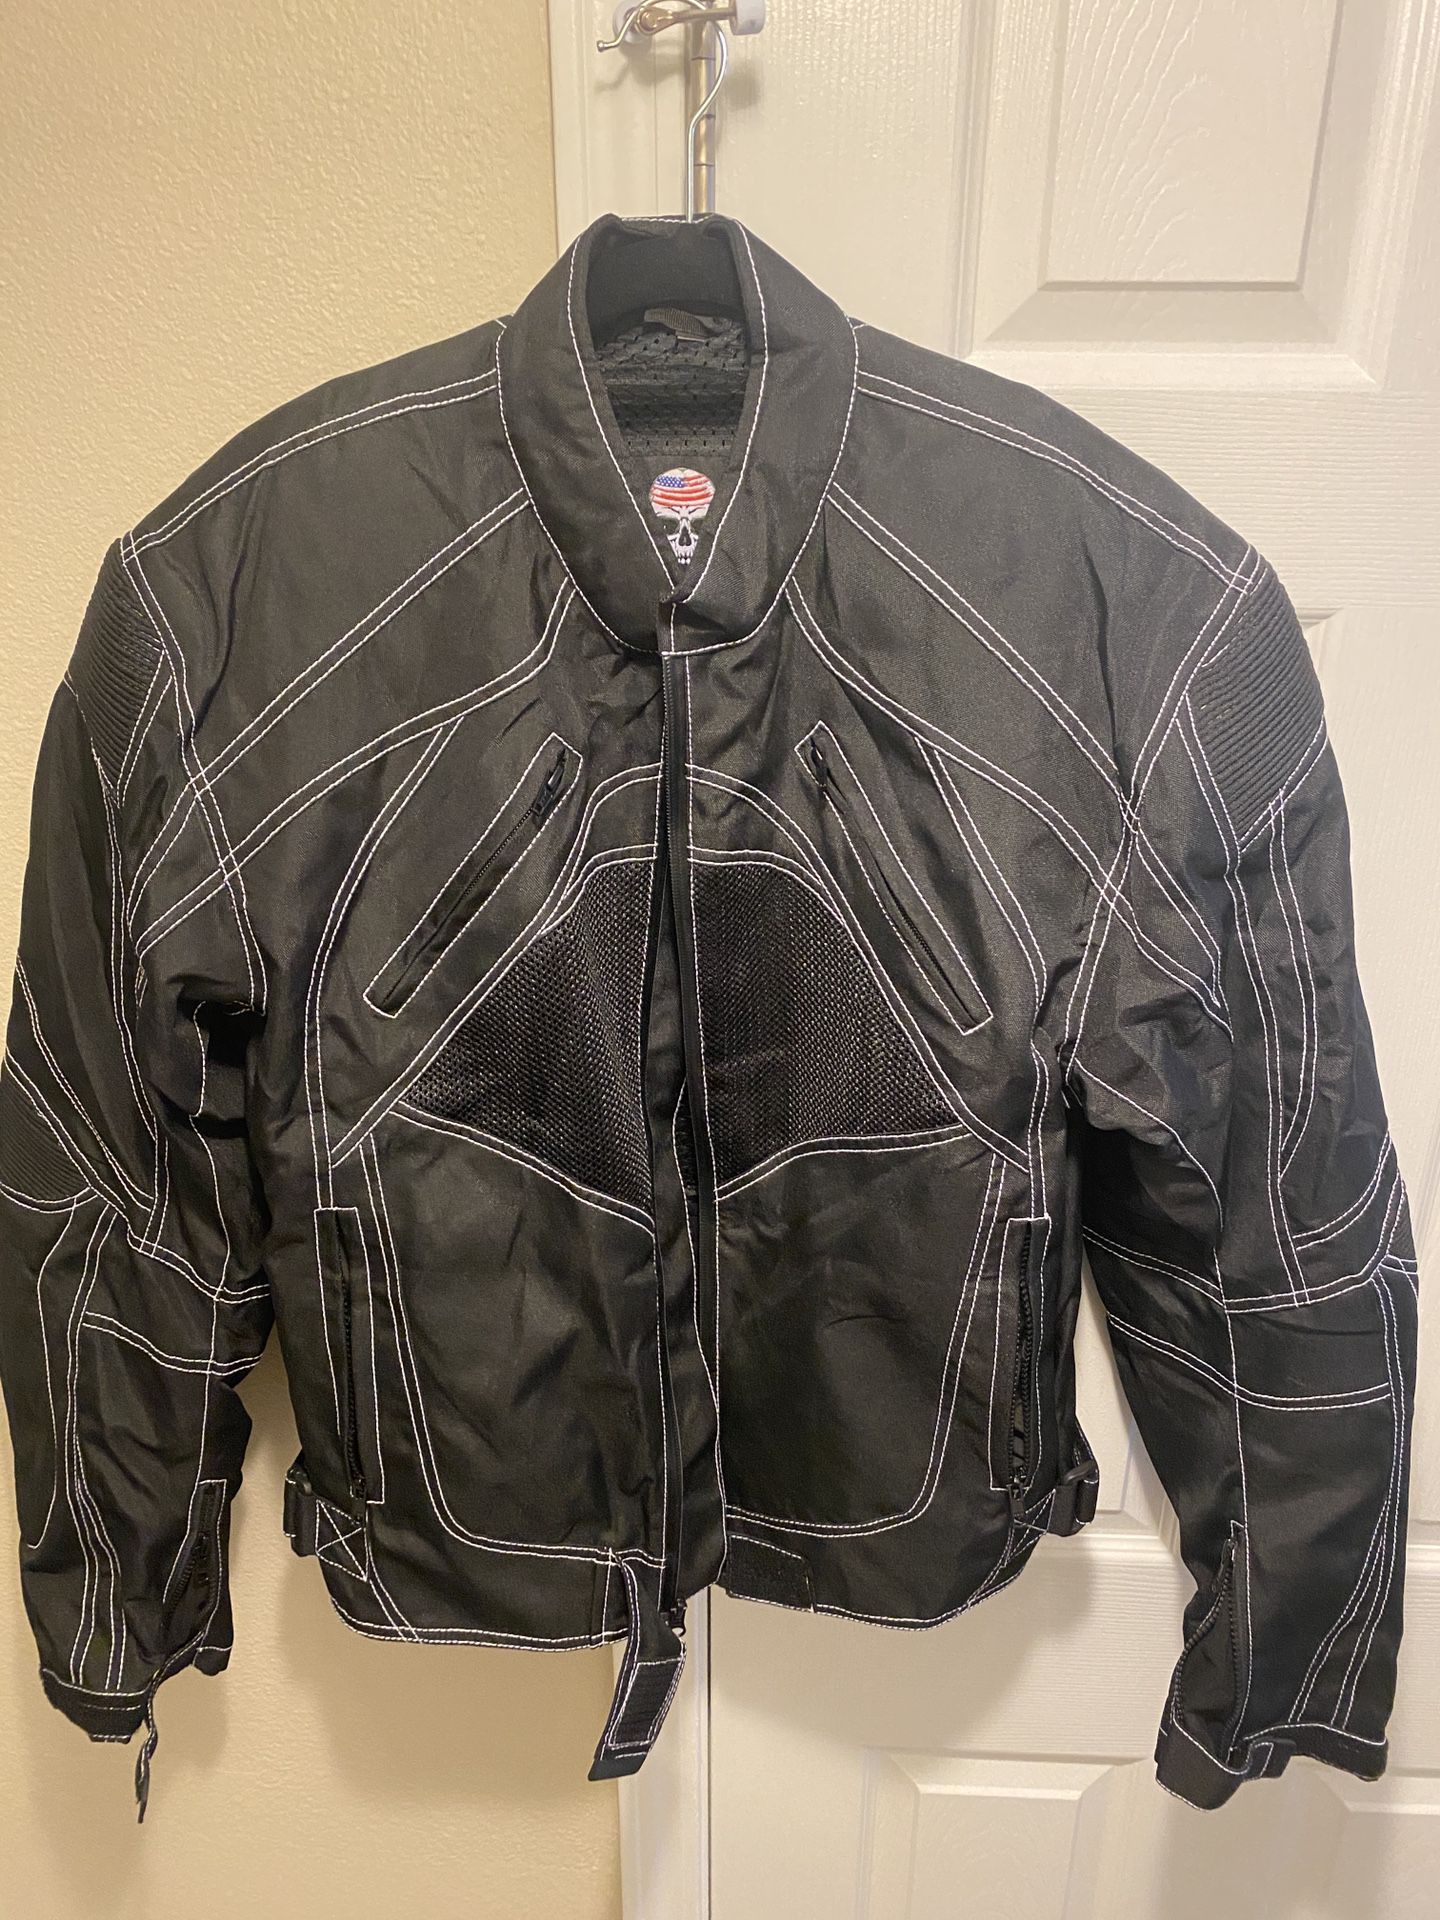 Brand New Motorcycle Jacket And Pants